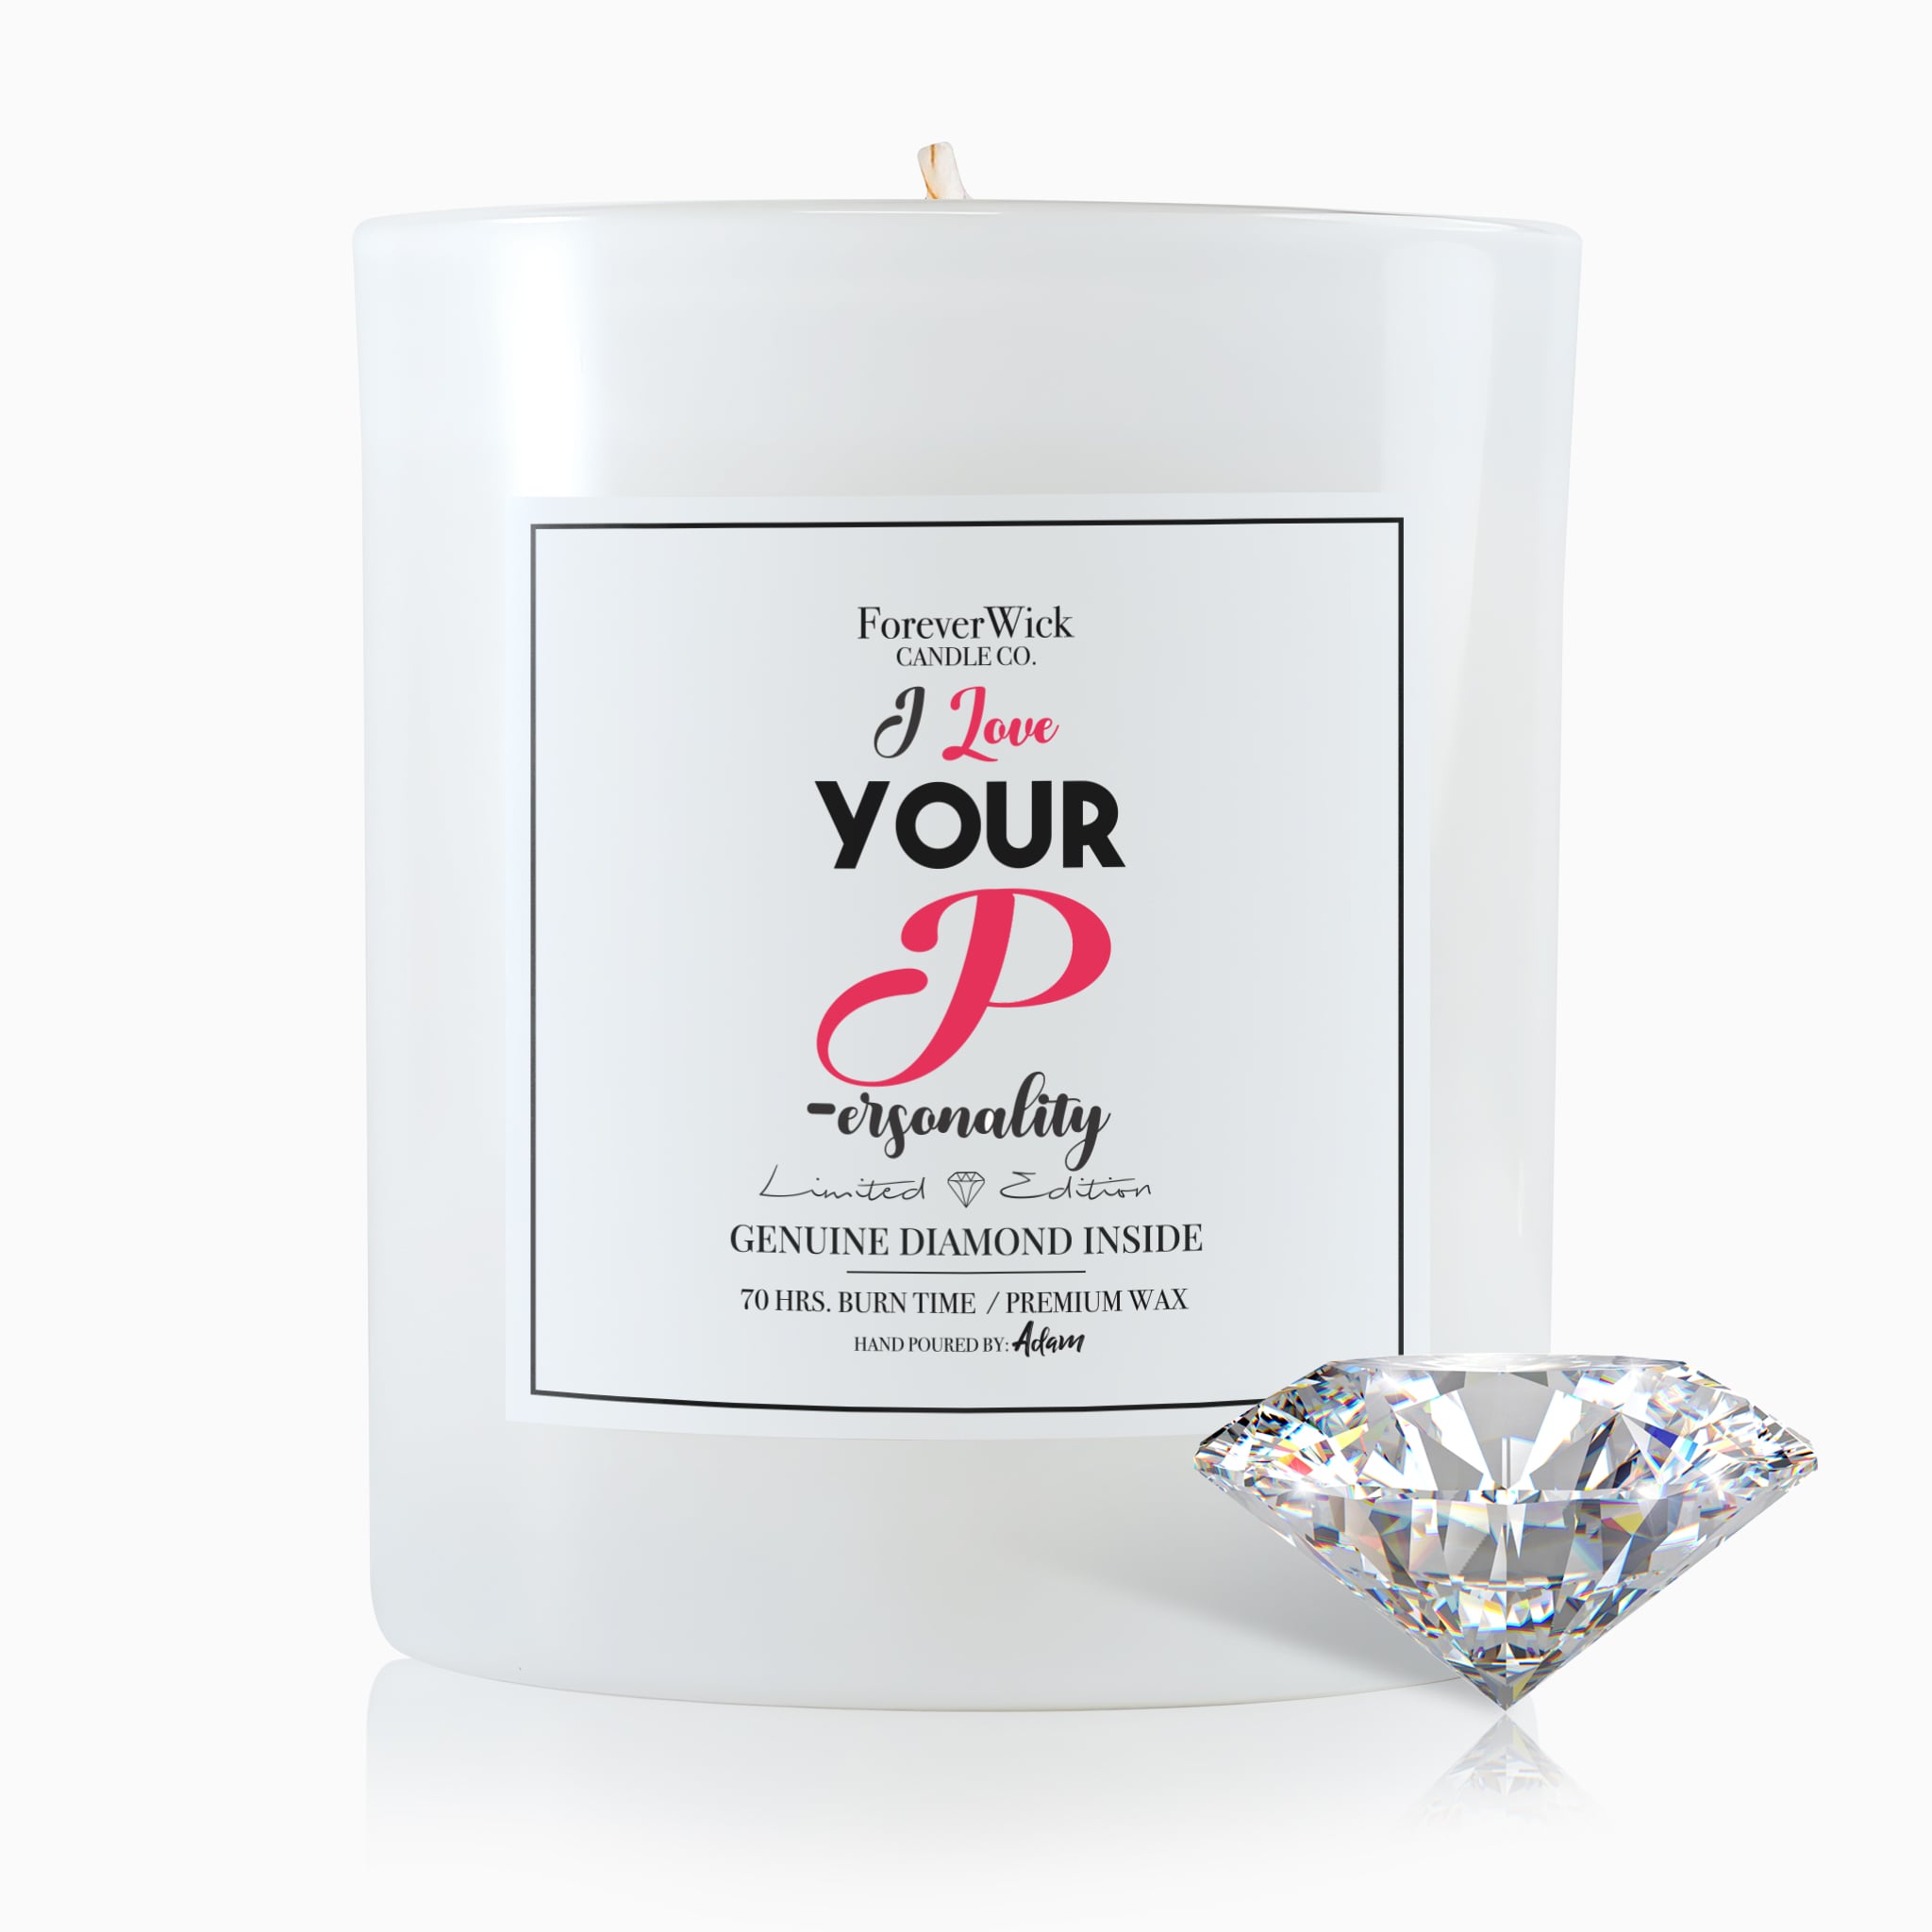 I love your P ersonality Diamond Candle